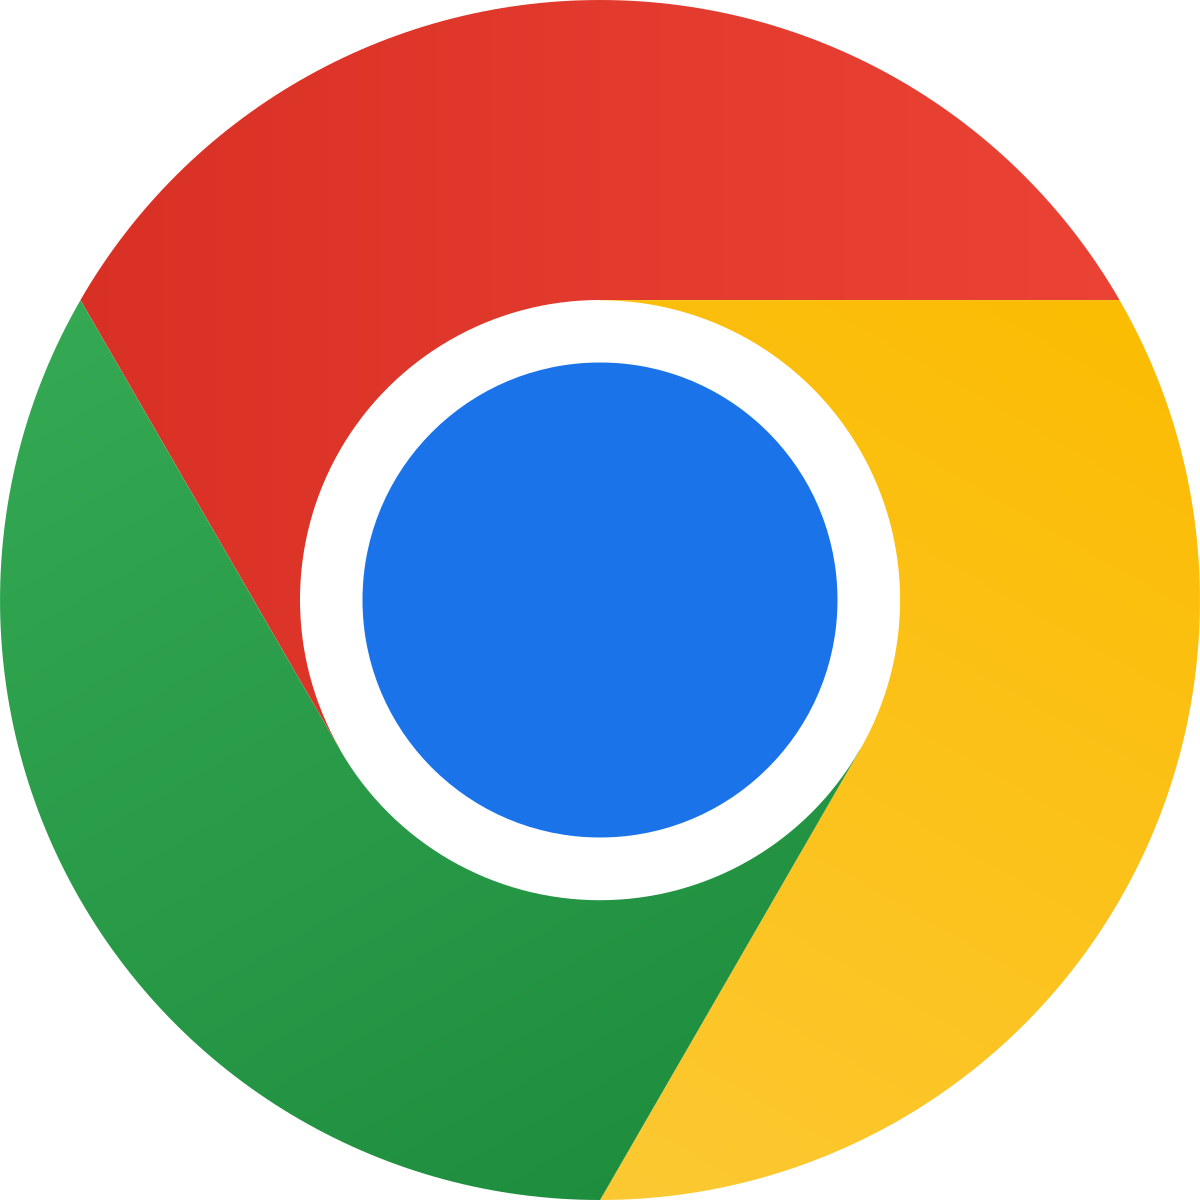 If you are experiencing issues with a specific browser, try using an alternative browser to download the file.
Install a different browser (such as Chrome, Firefox, or Edge), and attempt the download from there.